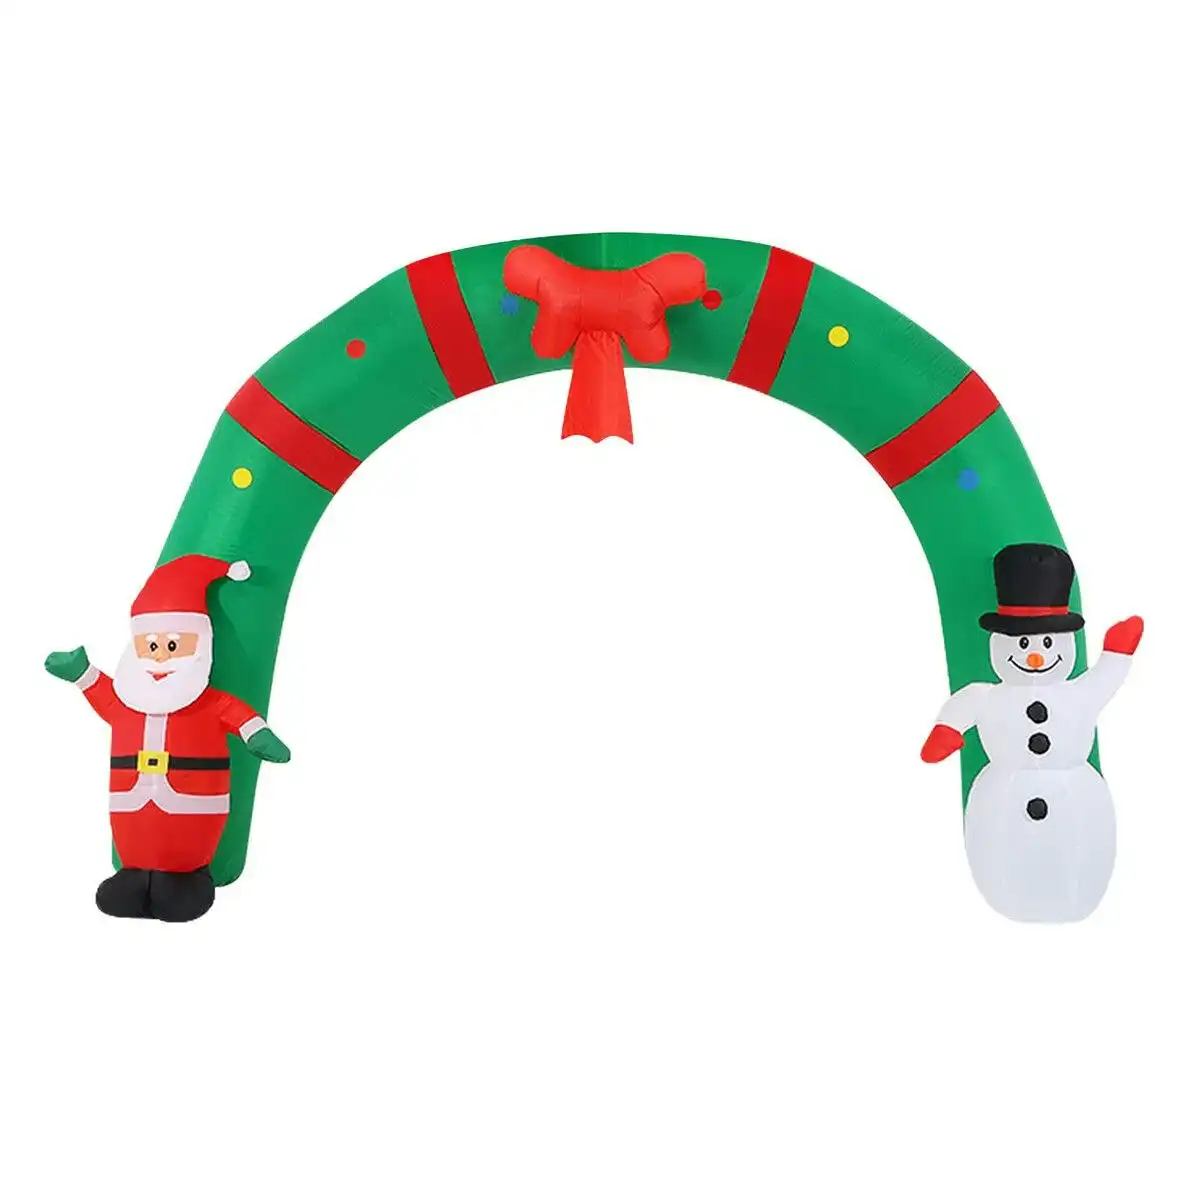 Solight Christmas Santa Claus Snowman Arch Decor Inflatable Decoration Xmas Light Holiday Ornament Outdoor Indoor Built In LED 300 x 250cm